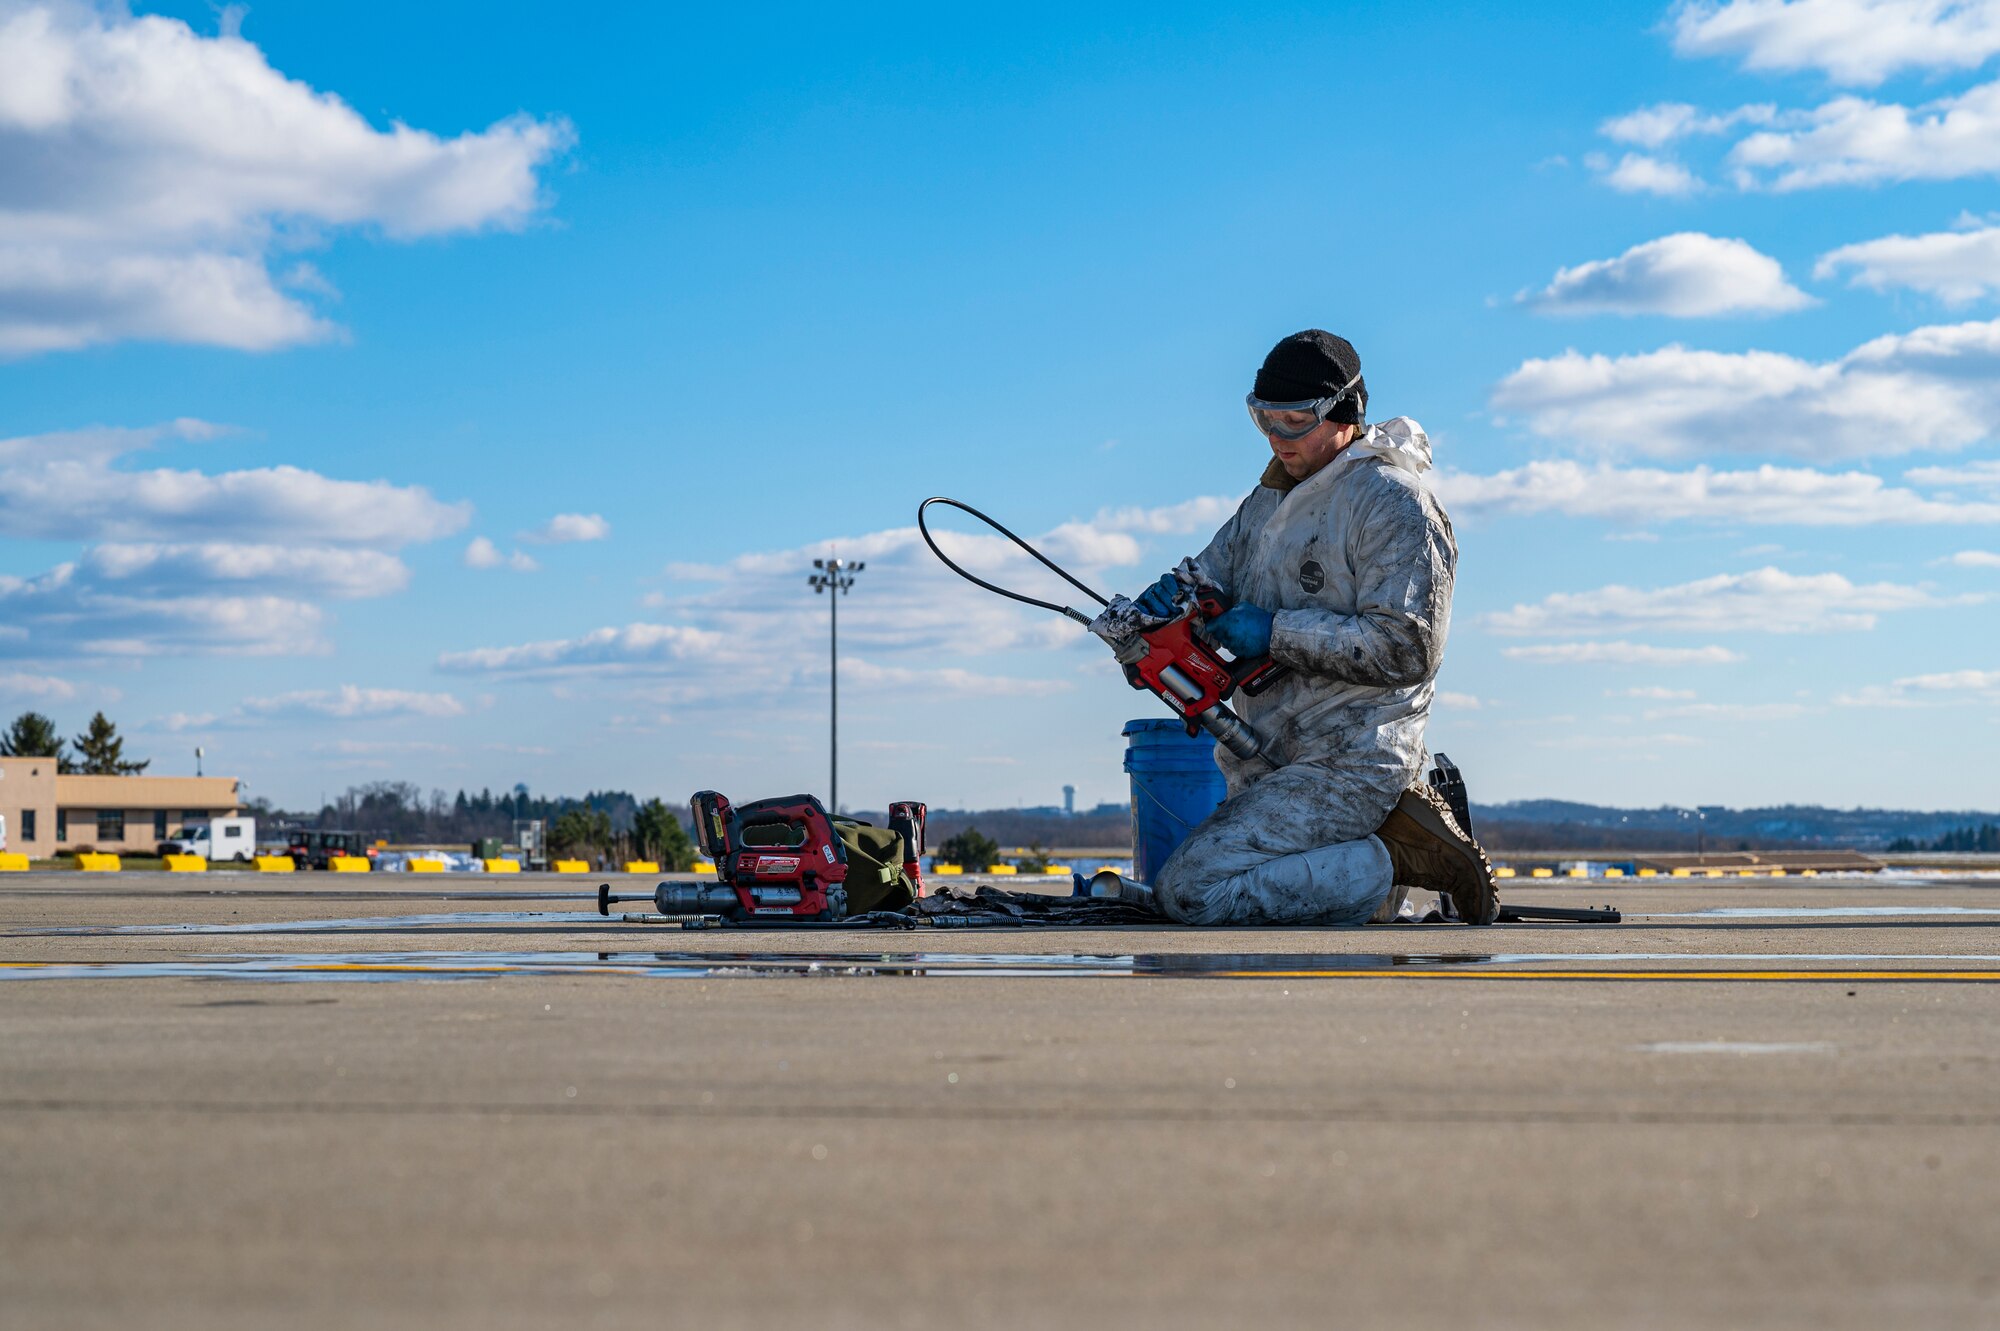 Tech. Sgt. Jeffrey Raymond, 911th Aircraft Maintenance Squadron crew chief, cleans a grease gun on the flight line at the Pittsburgh International Airport Air Reserve Station, Pennsylvania, Dec. 29, 2020.